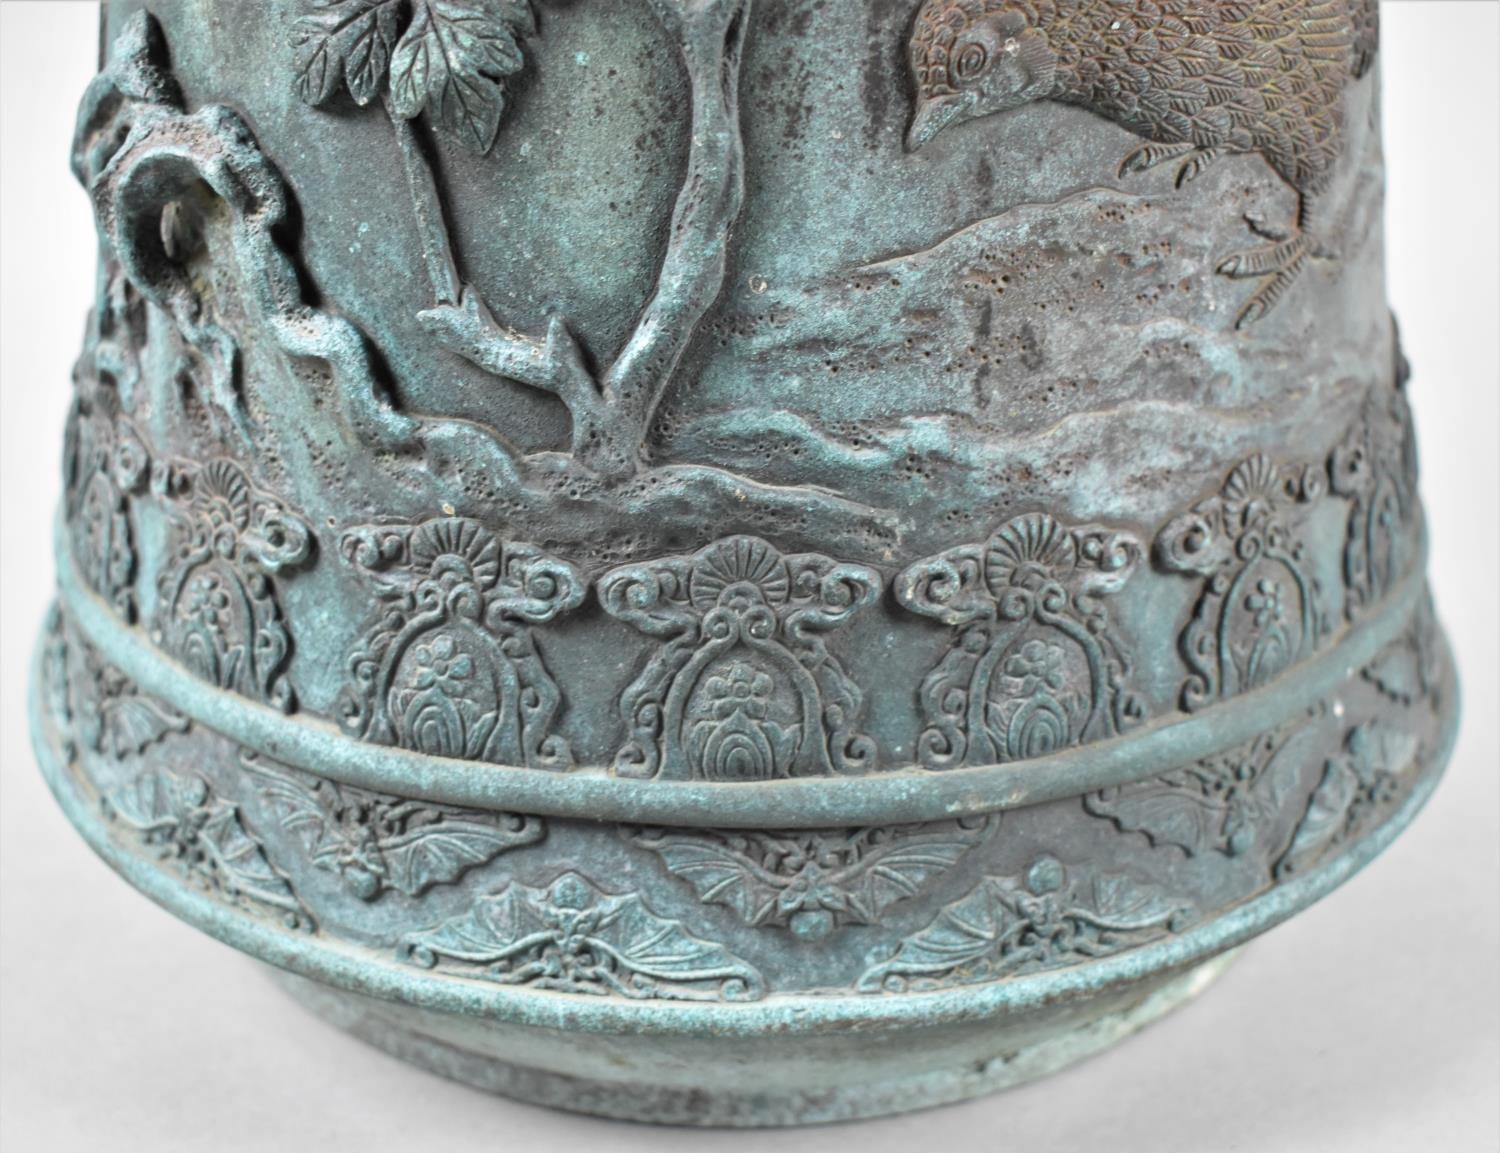 A Large Heavy Japanese Bronze Vase Decorated in High Relief Telling the Story of Oiwa from the - Image 5 of 9